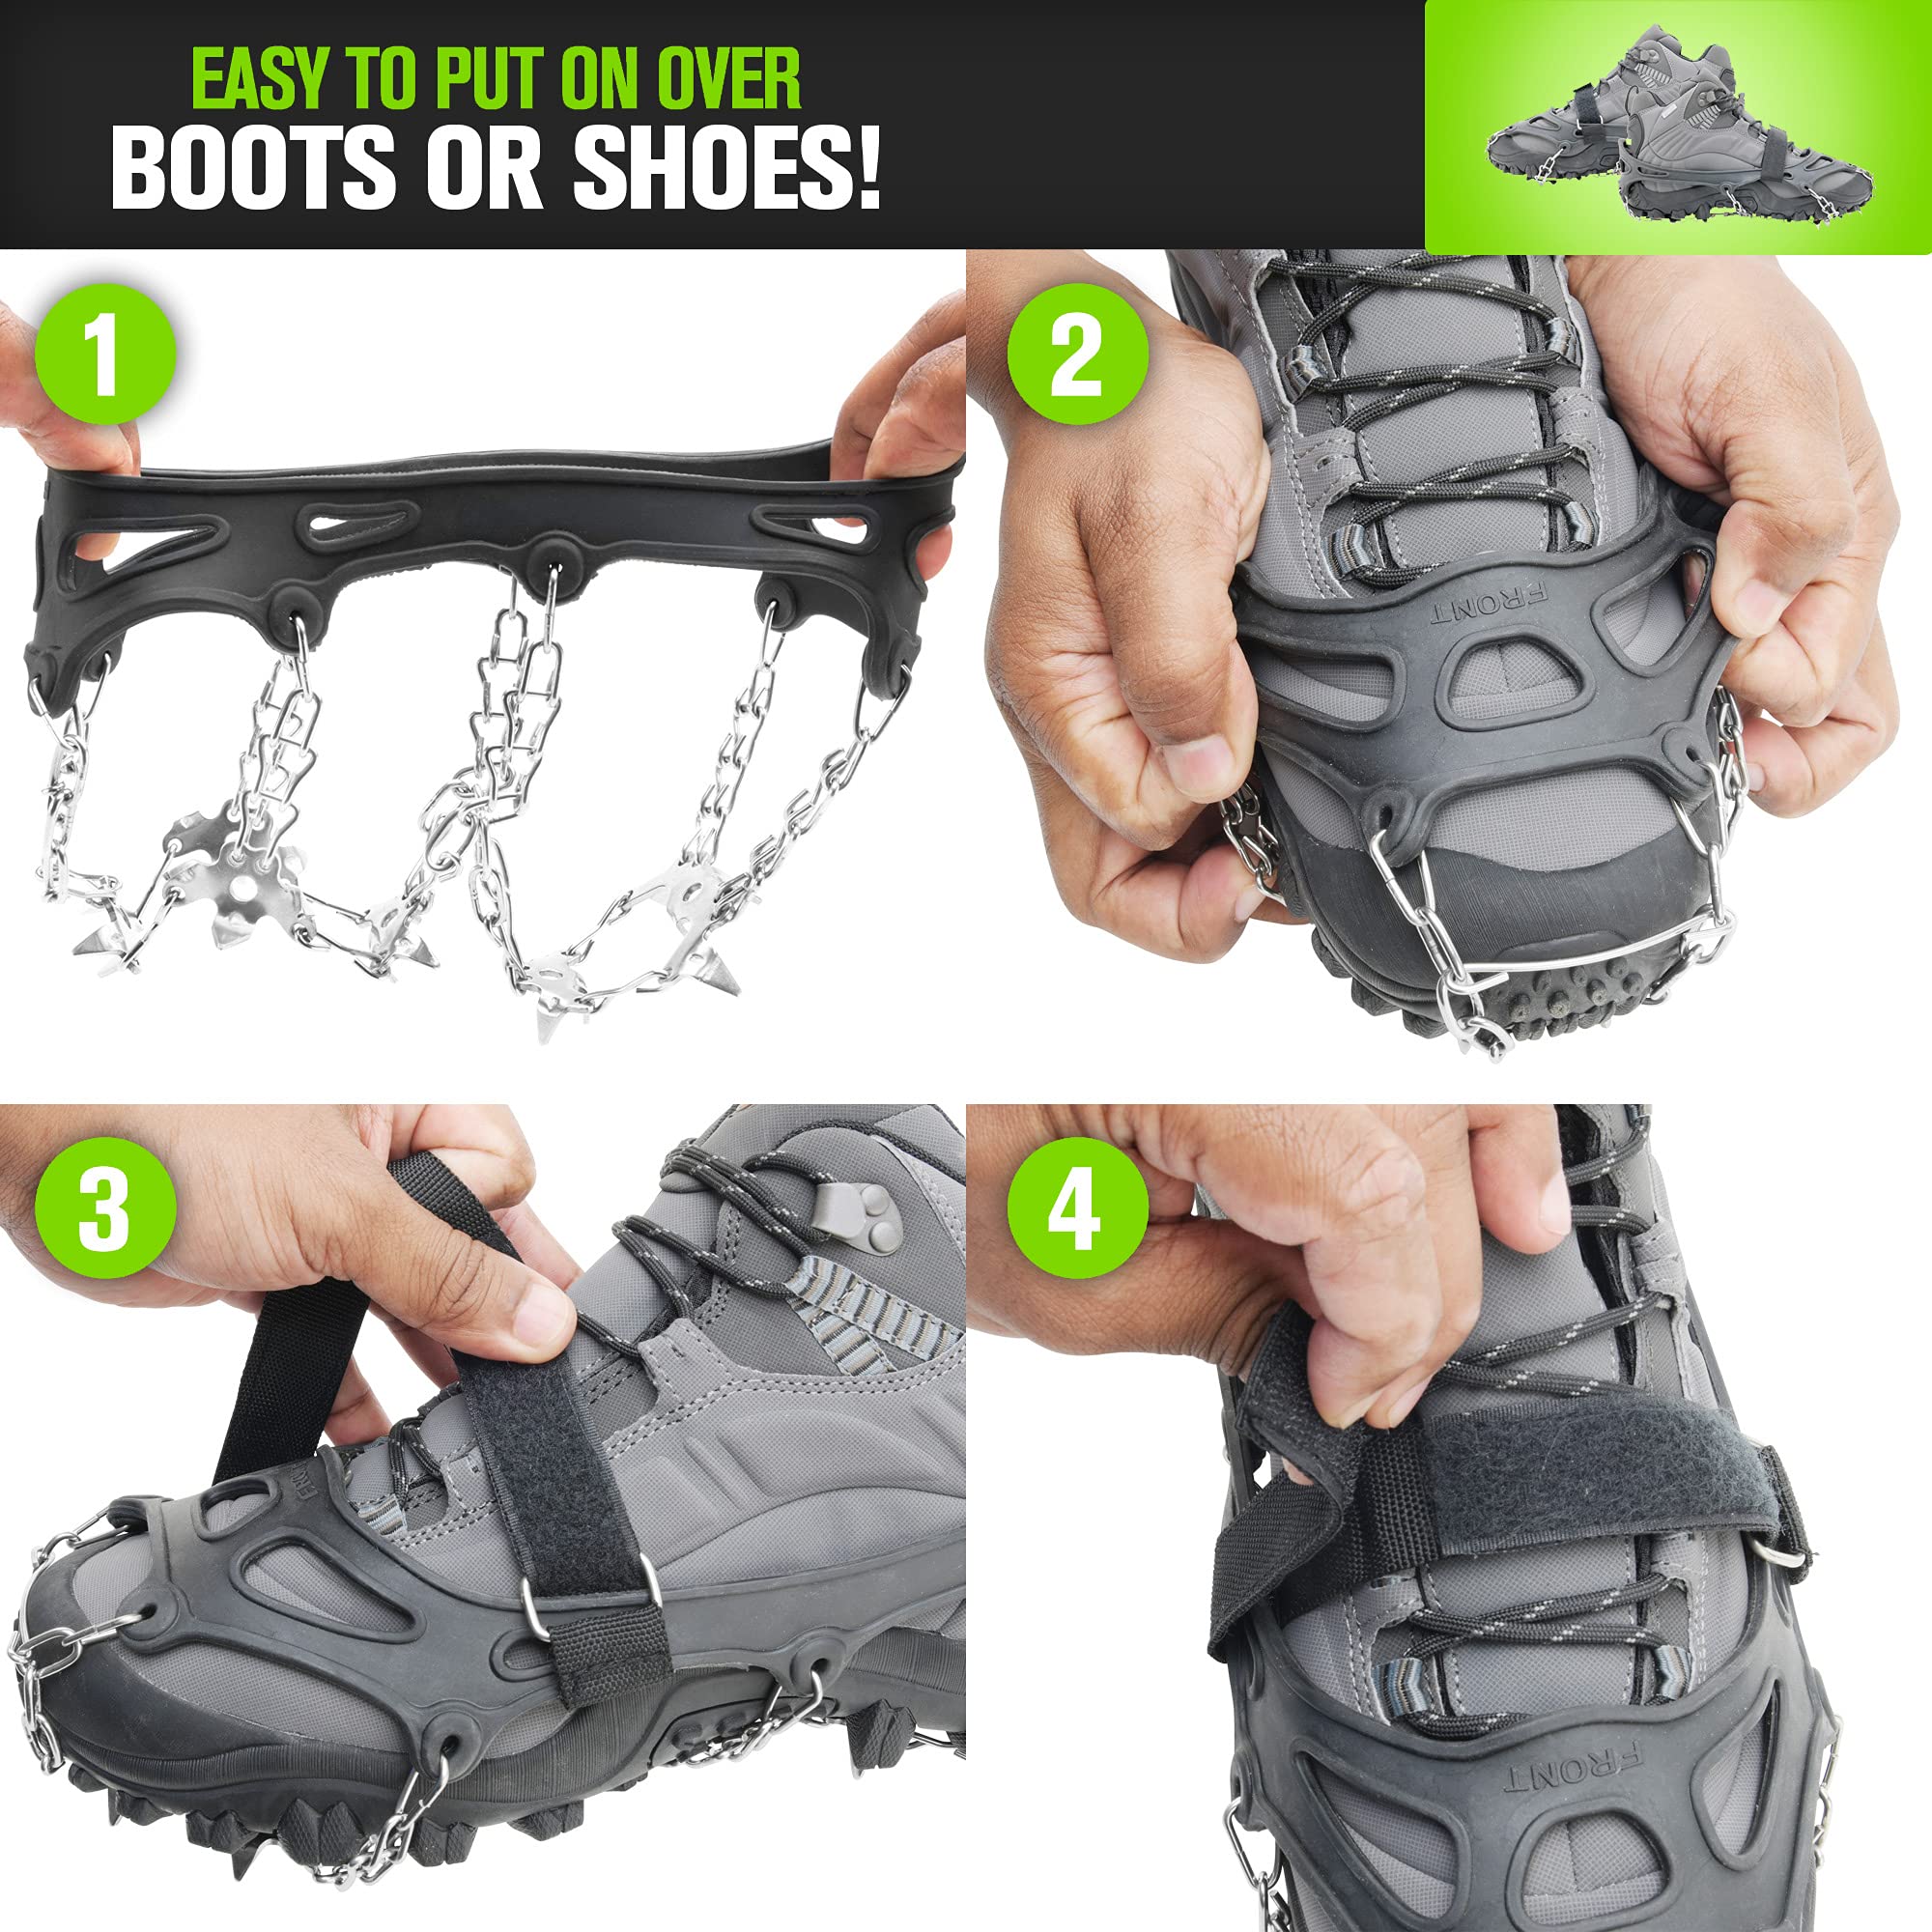 Crampons for Hiking Boots - Men and Women - 19 Non-Slip Spikes for Hiking - Hiking Spikes for Boots and Shoes – Best for Snow and Ice - Crampon Traction